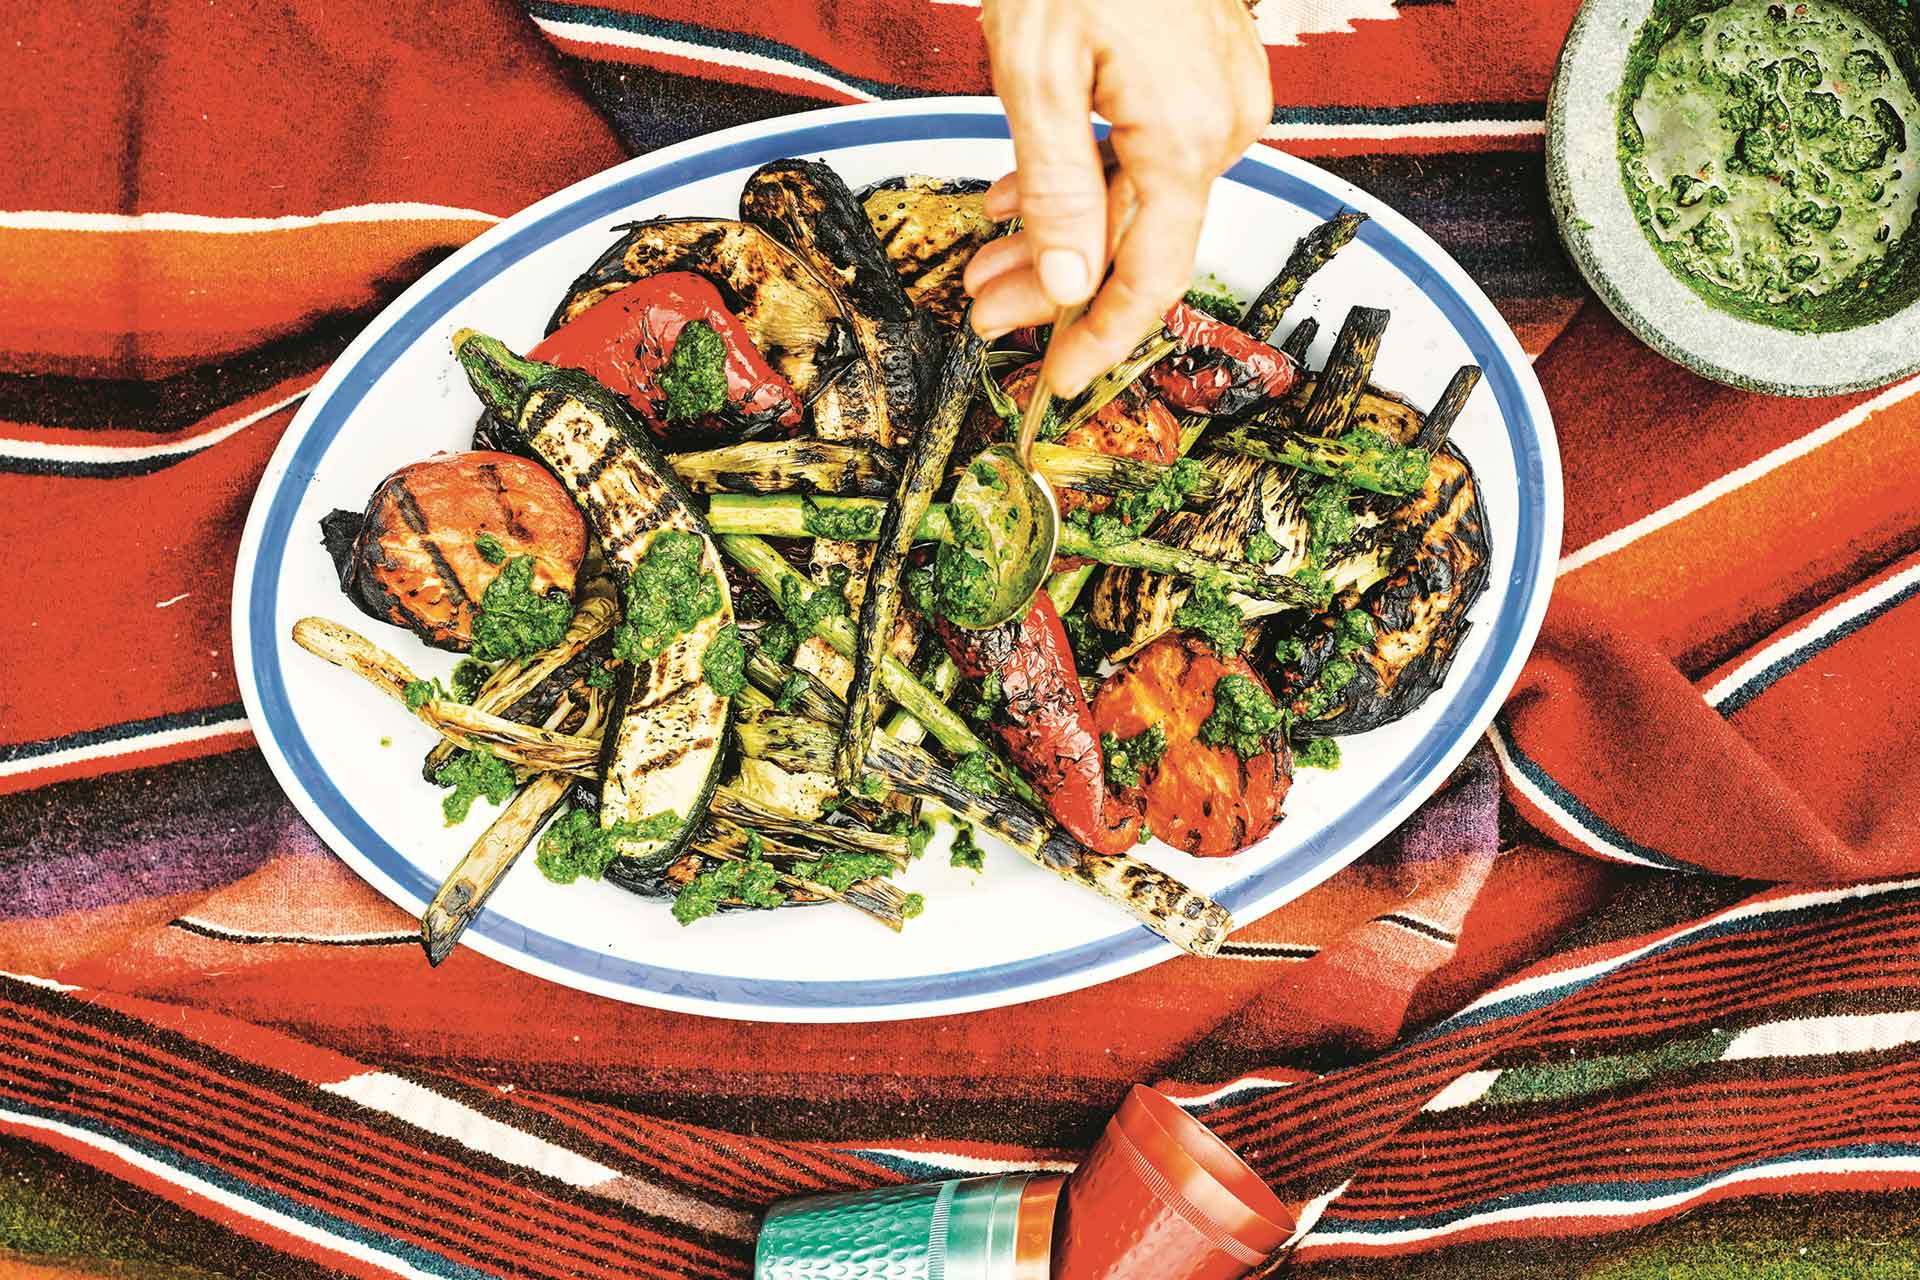 make barbecued vegetables part of your veggie bbq